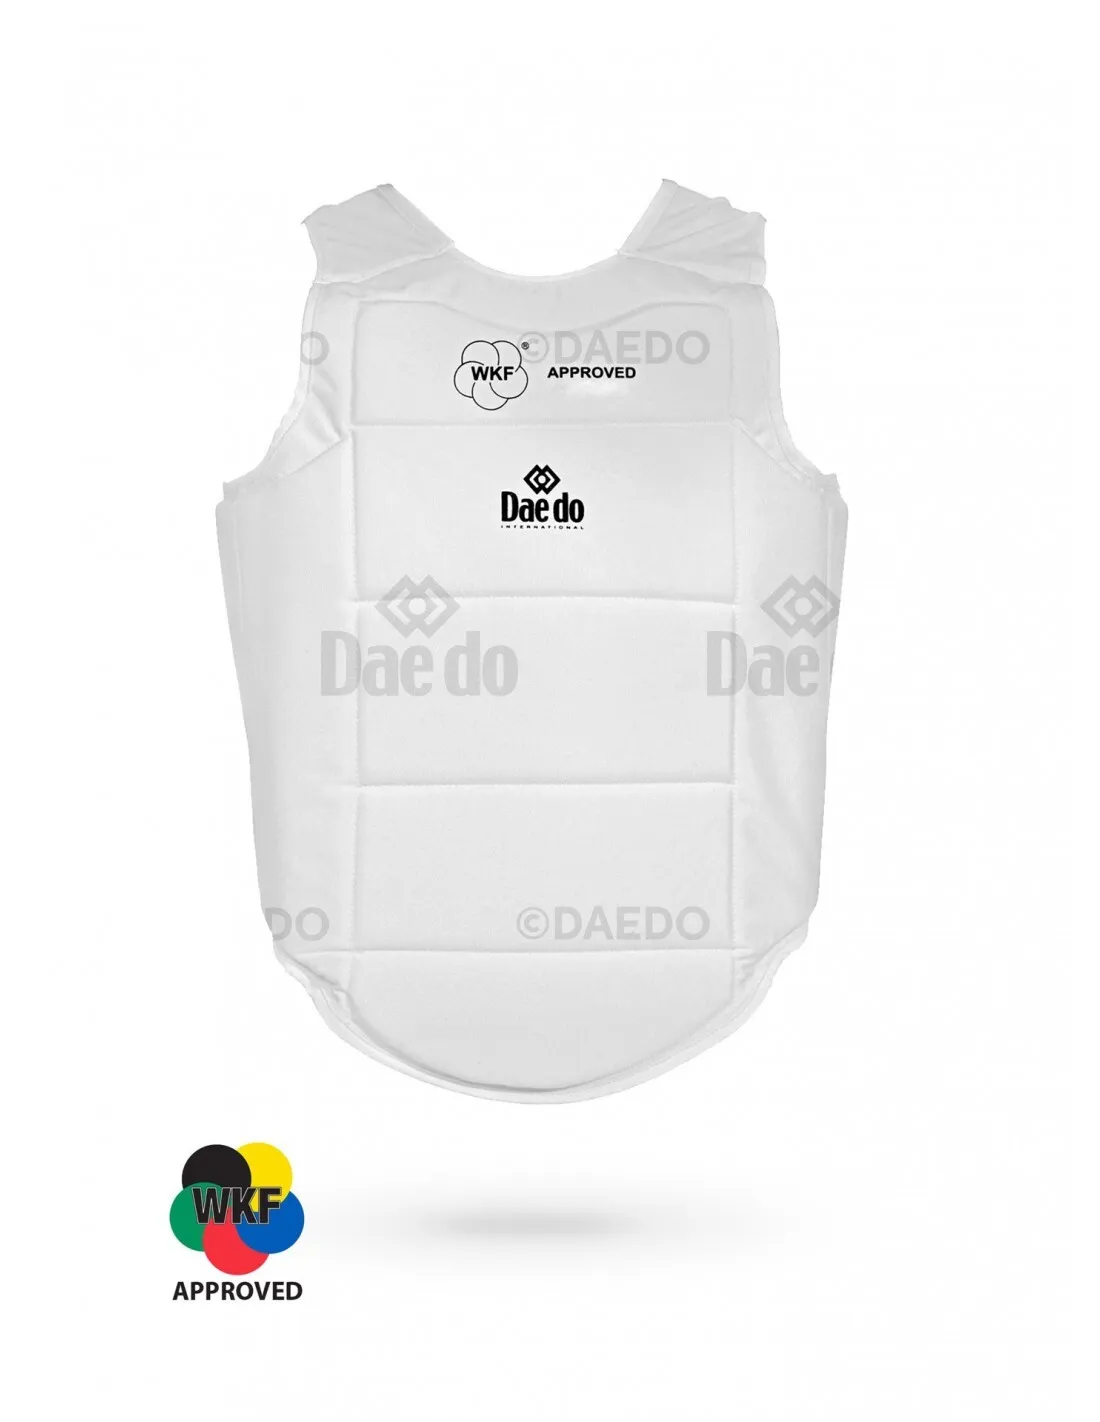 DAEDO - WKF APPROVED BODY PROTECTOR